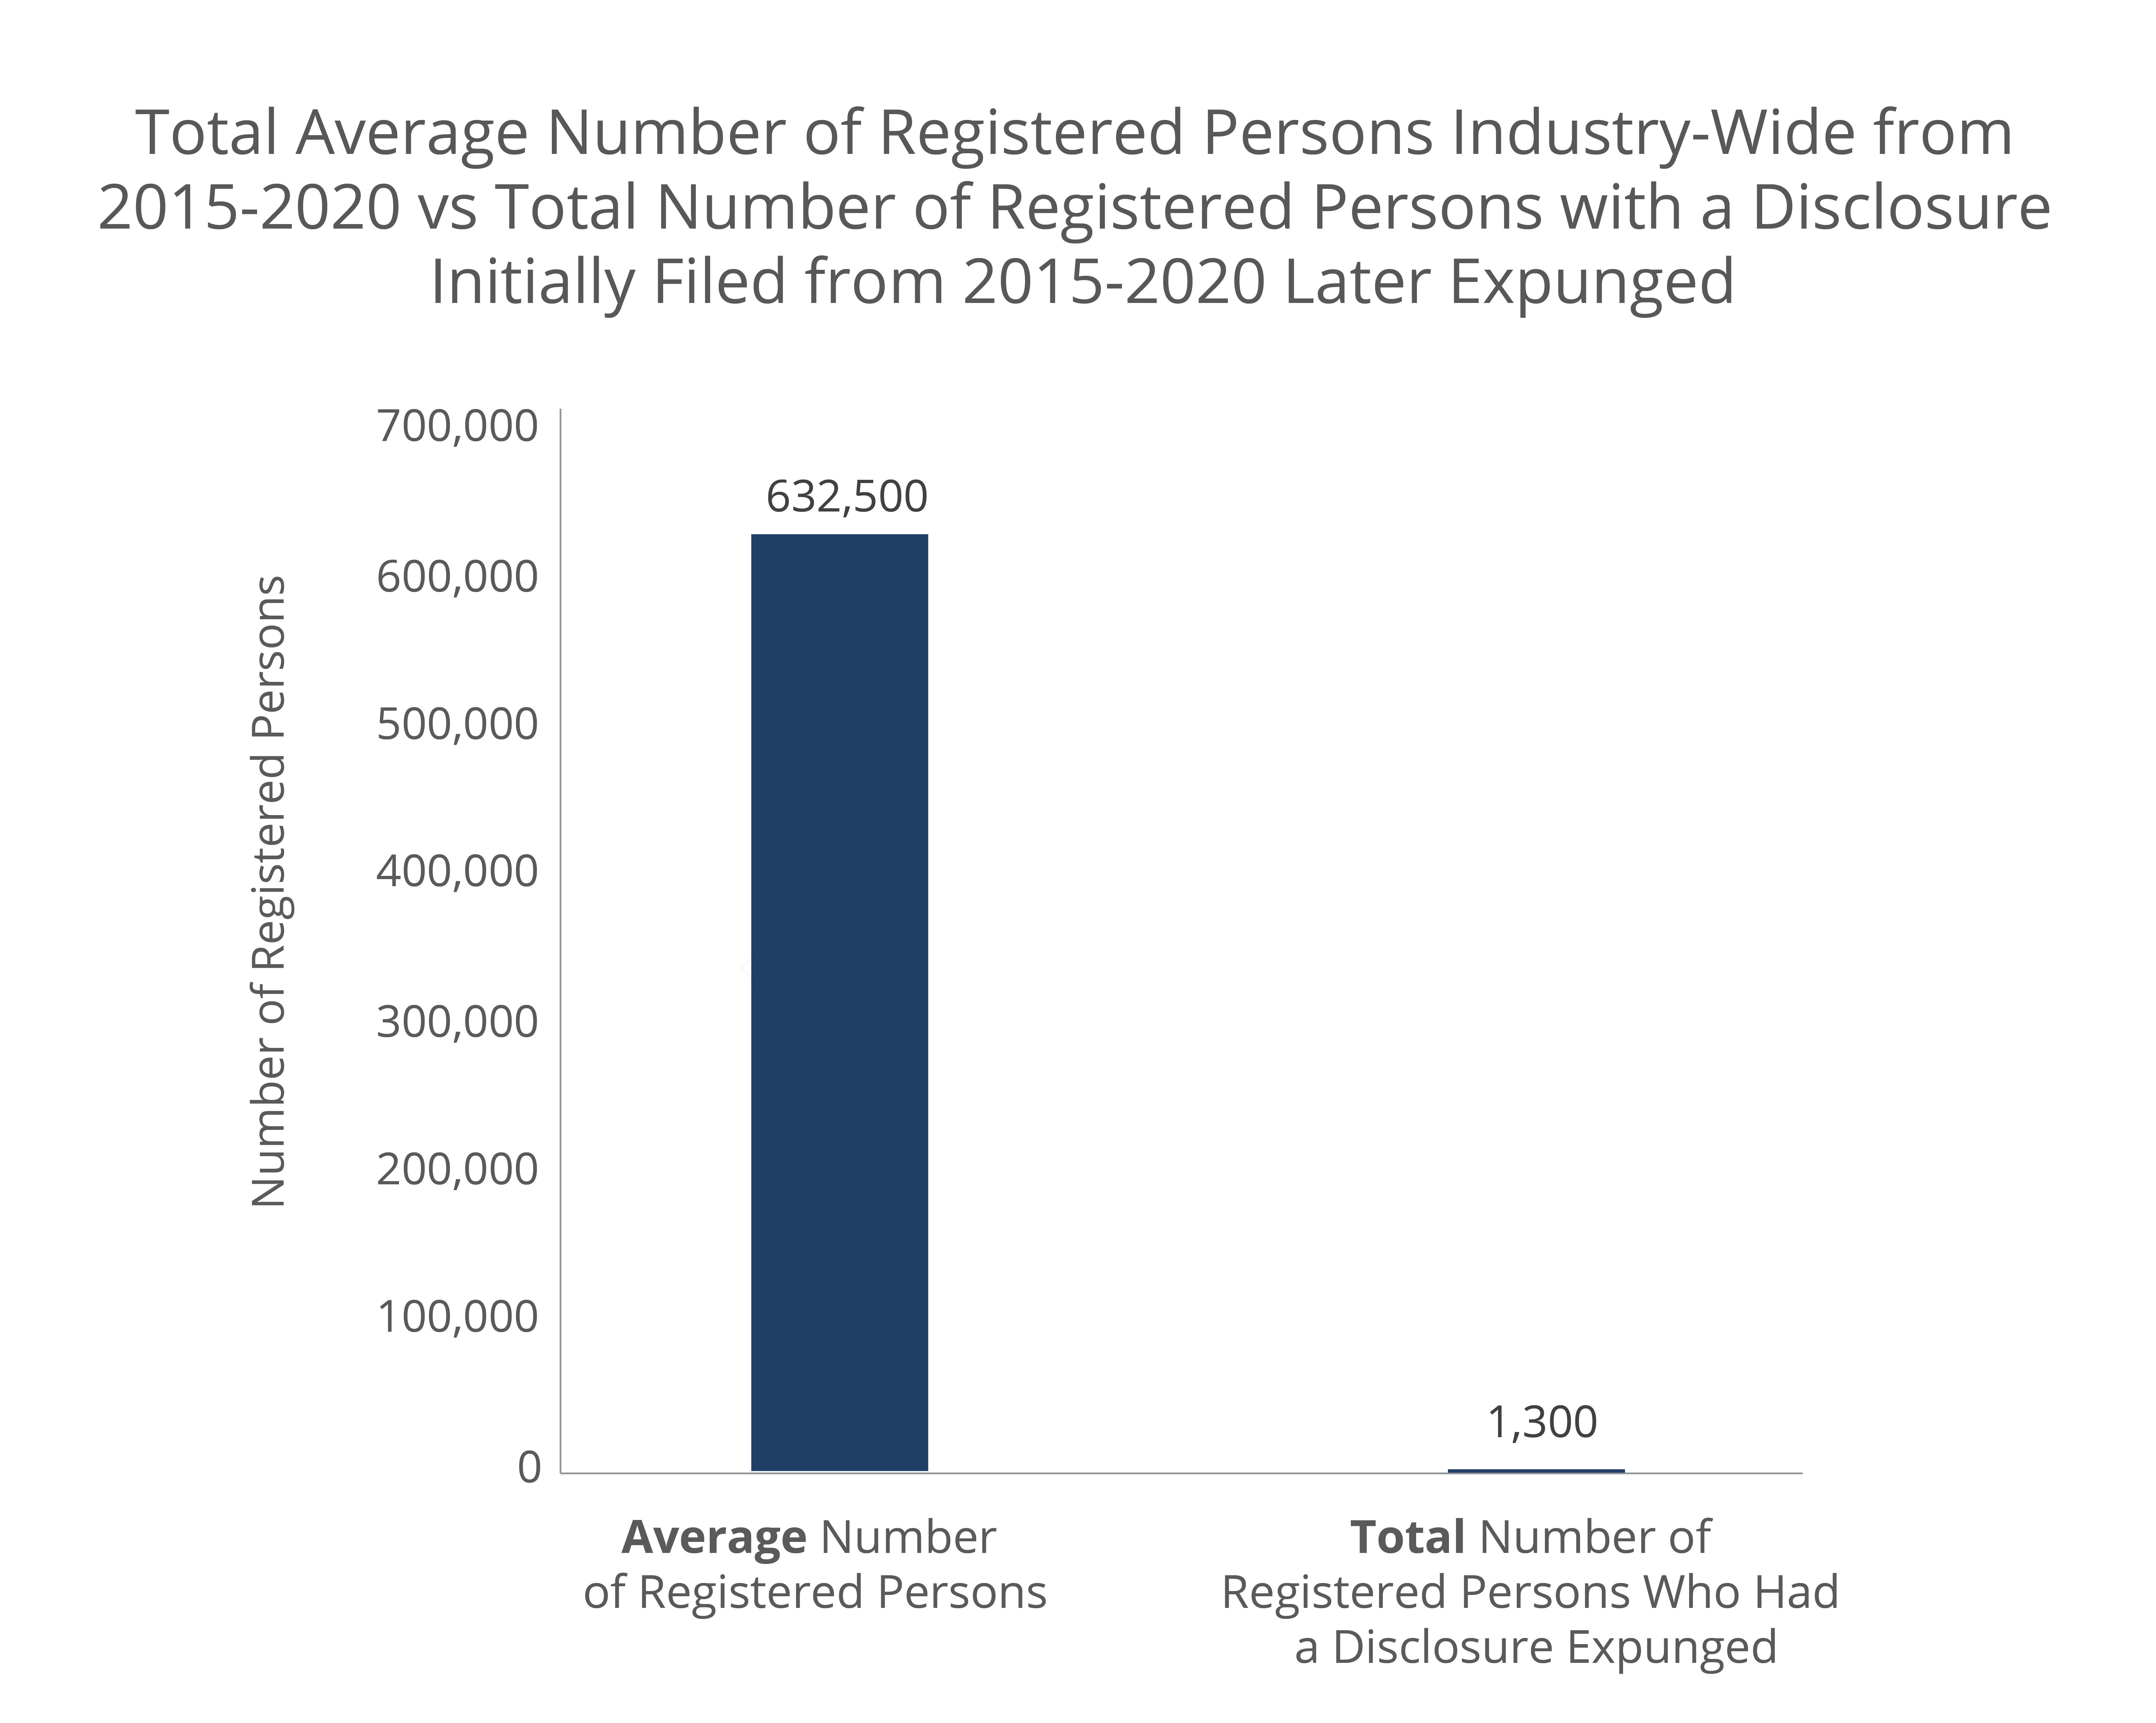 Average Number of Brokers vs Total Number Expunged 2015 - 2020